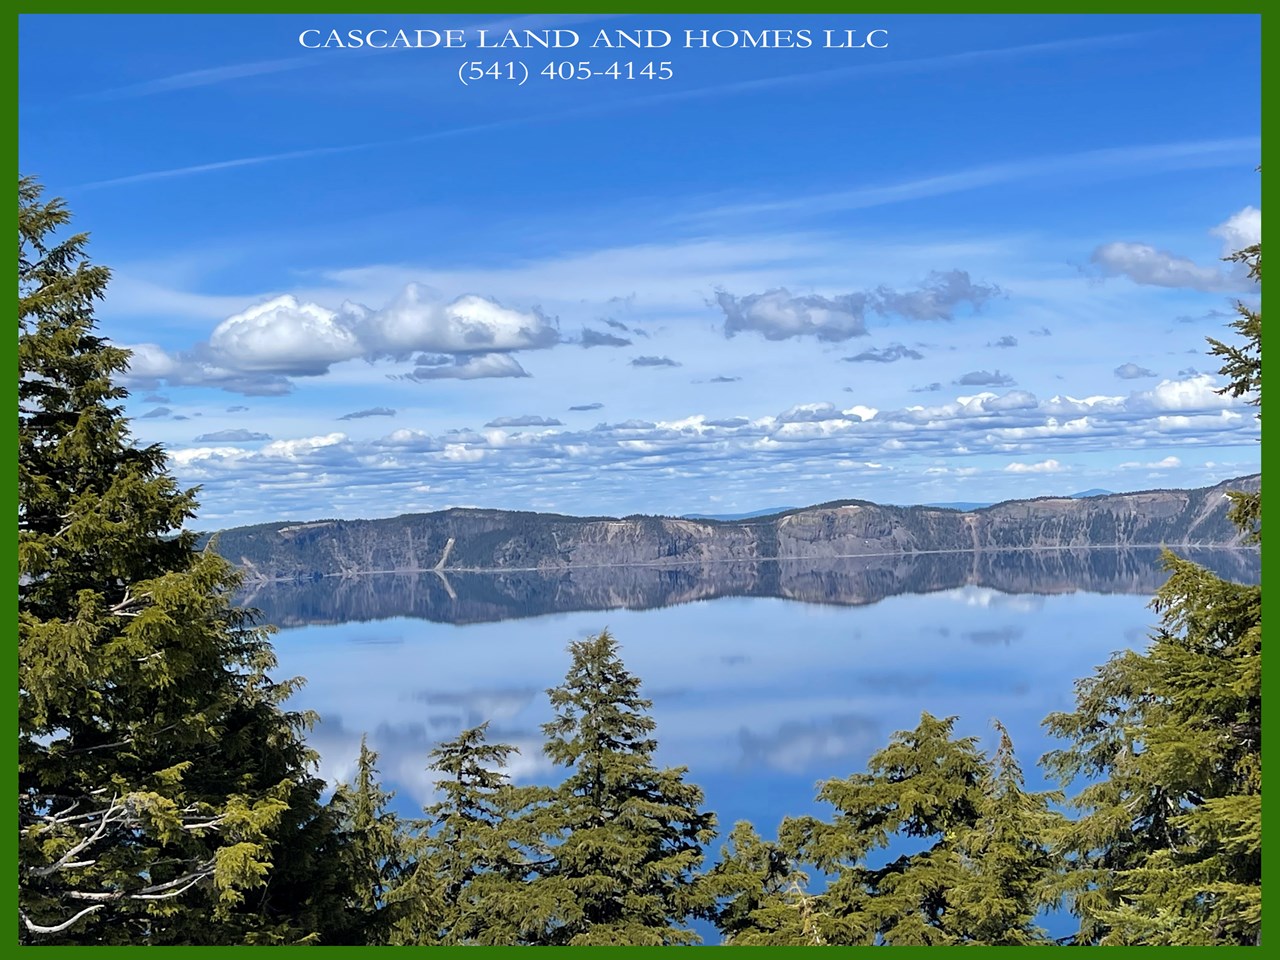 crater lake national park is only about 45 minutes away from the property!